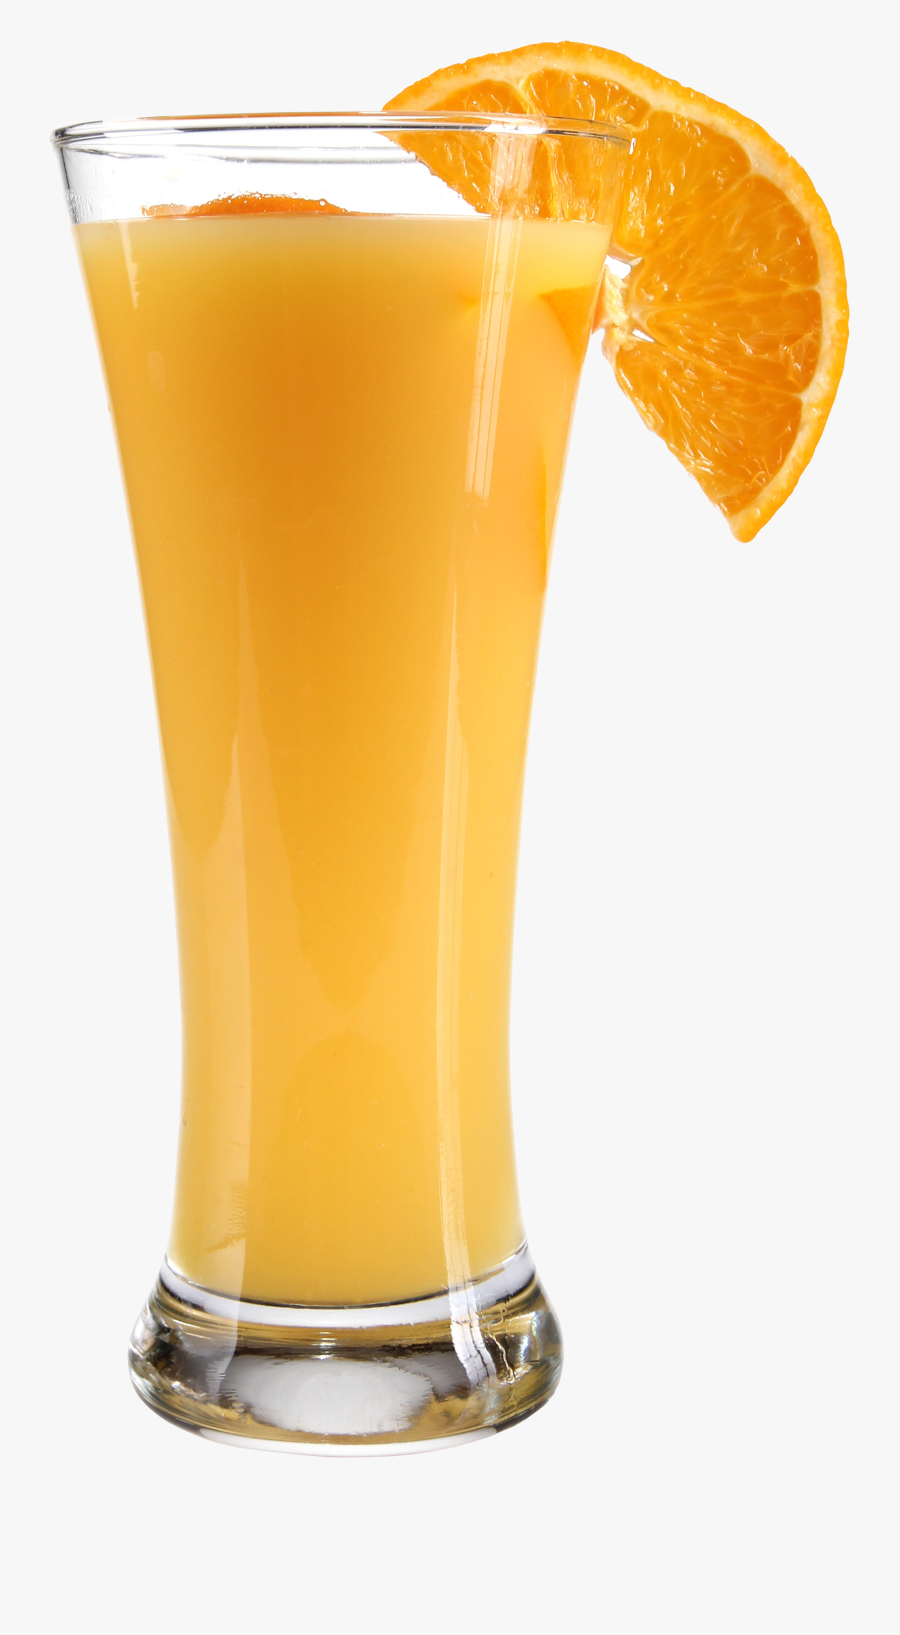 Juice Png Images Free Download - Orange Juice In A Glass, Transparent Clipart